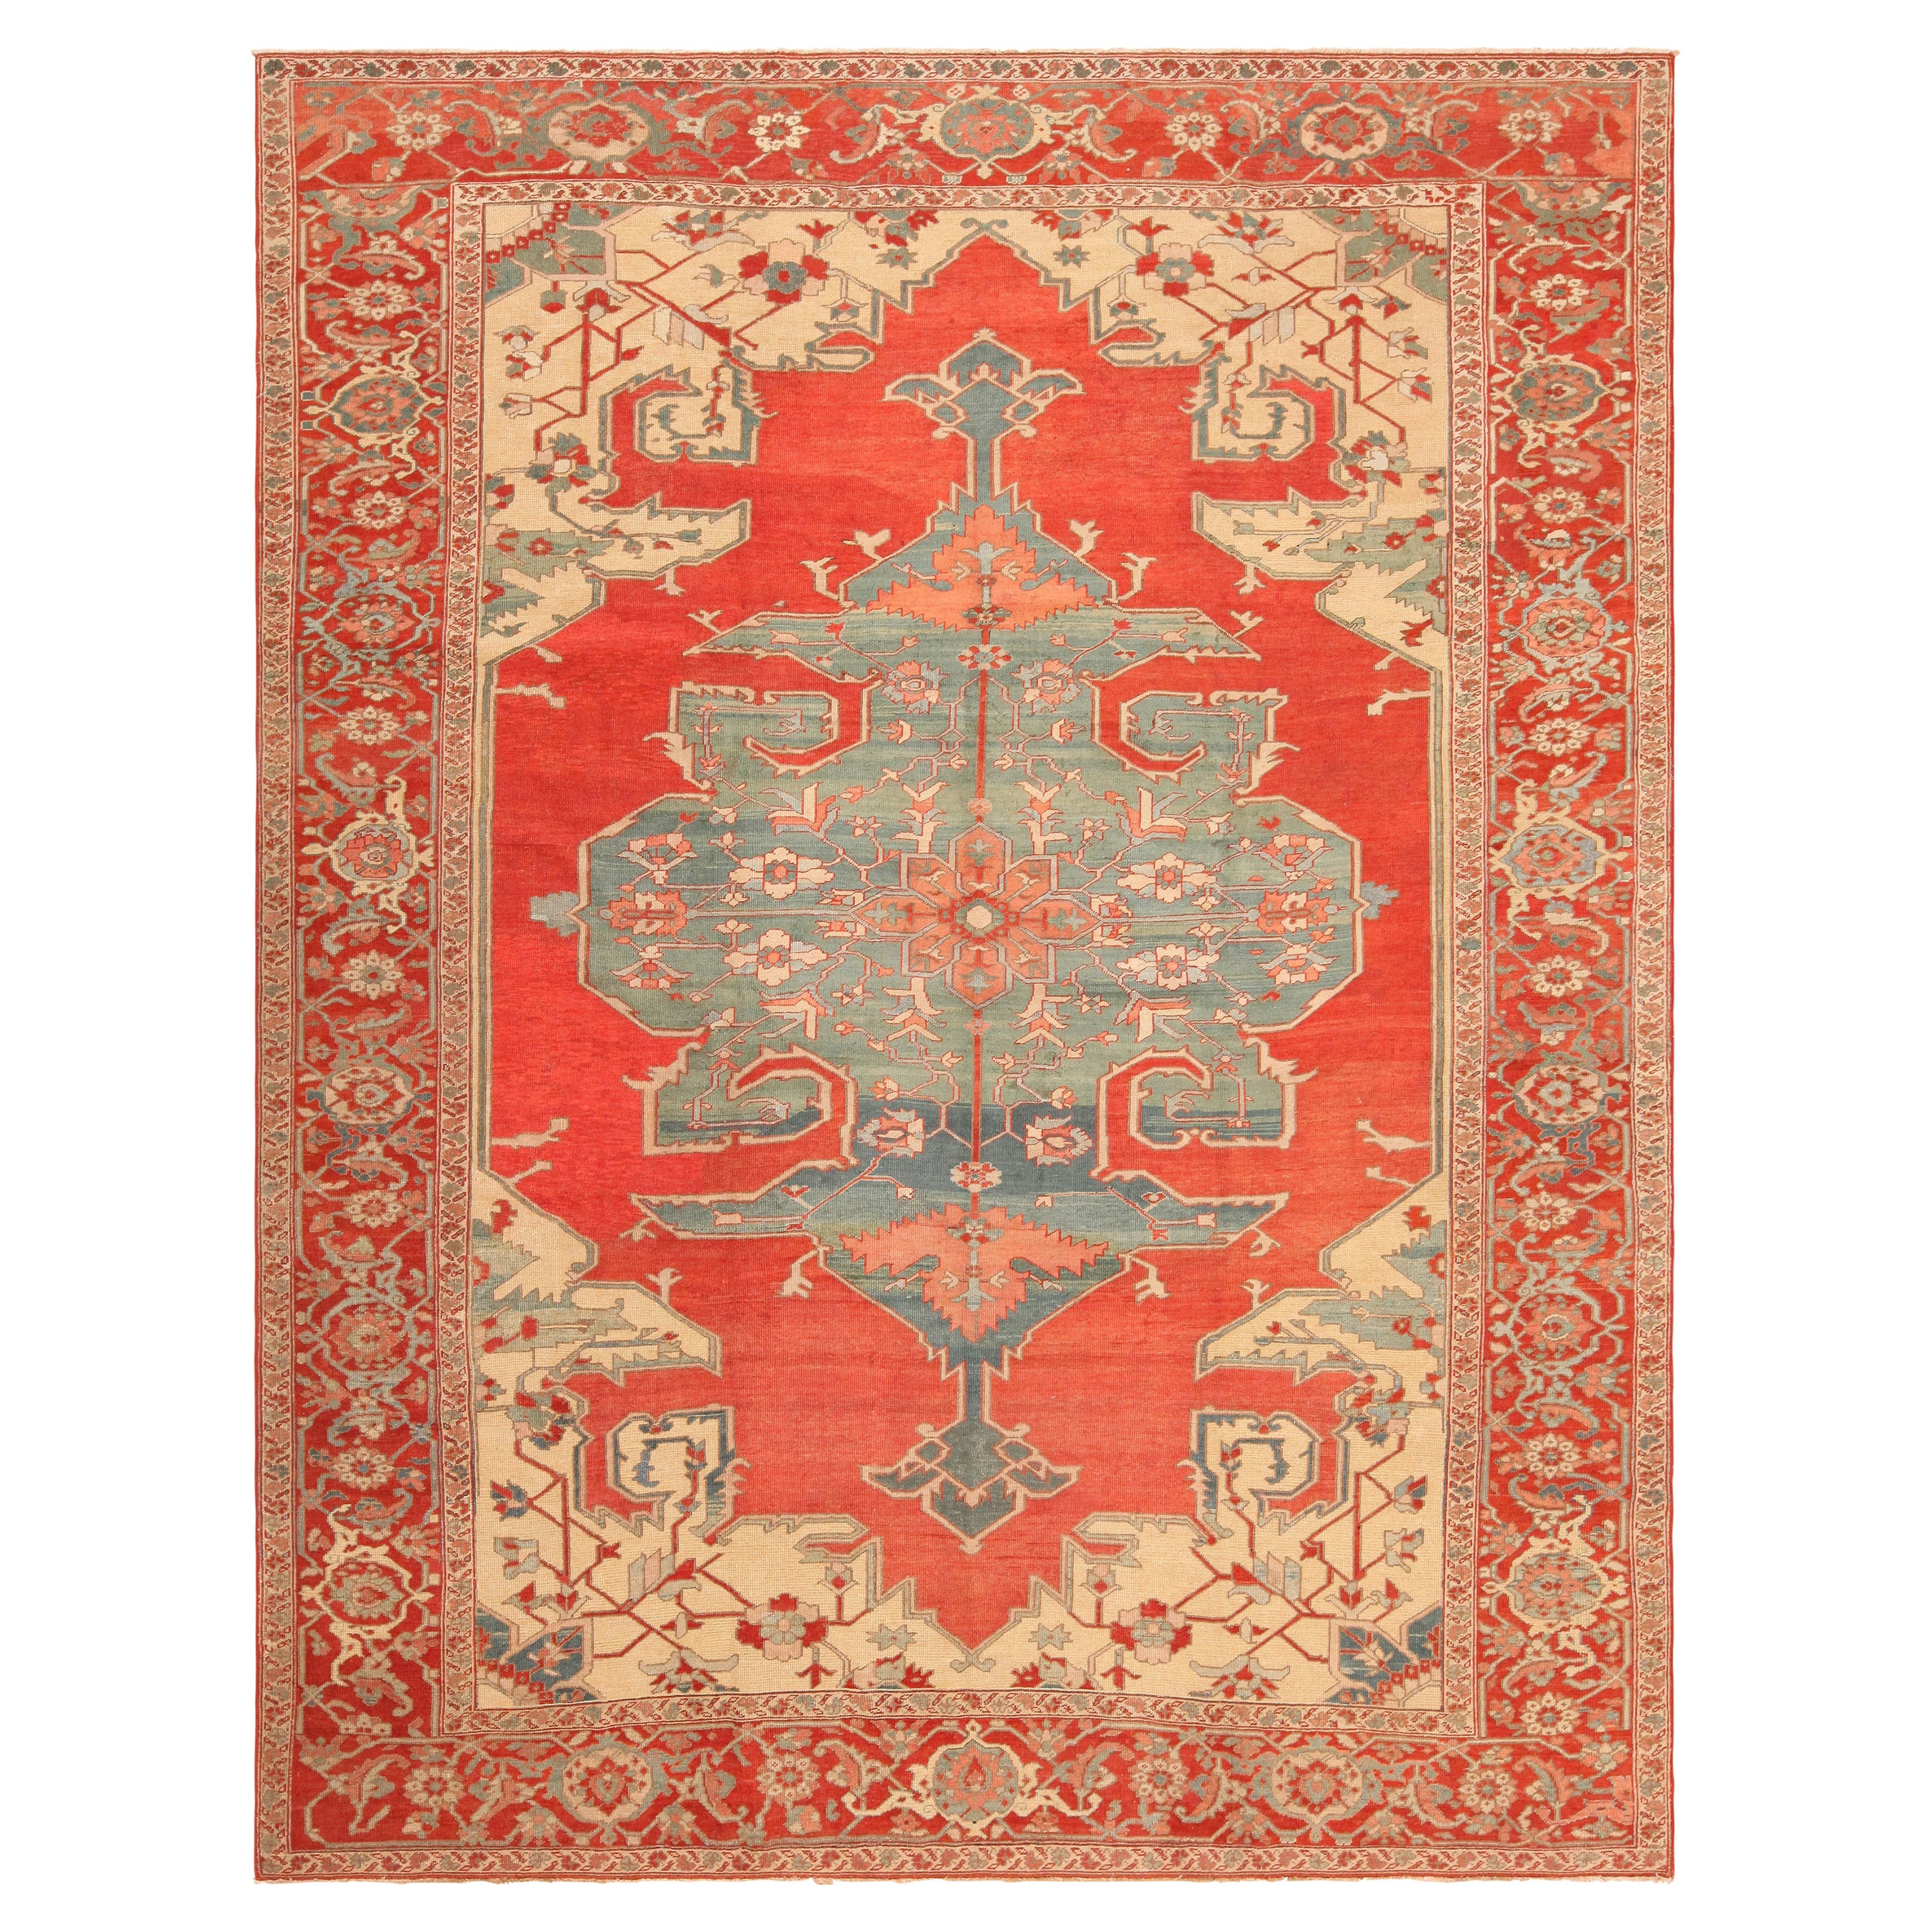 Nazmiyal Collection Antique Persian Serapi Rug. Size: 9 ft x 11 ft 6 in